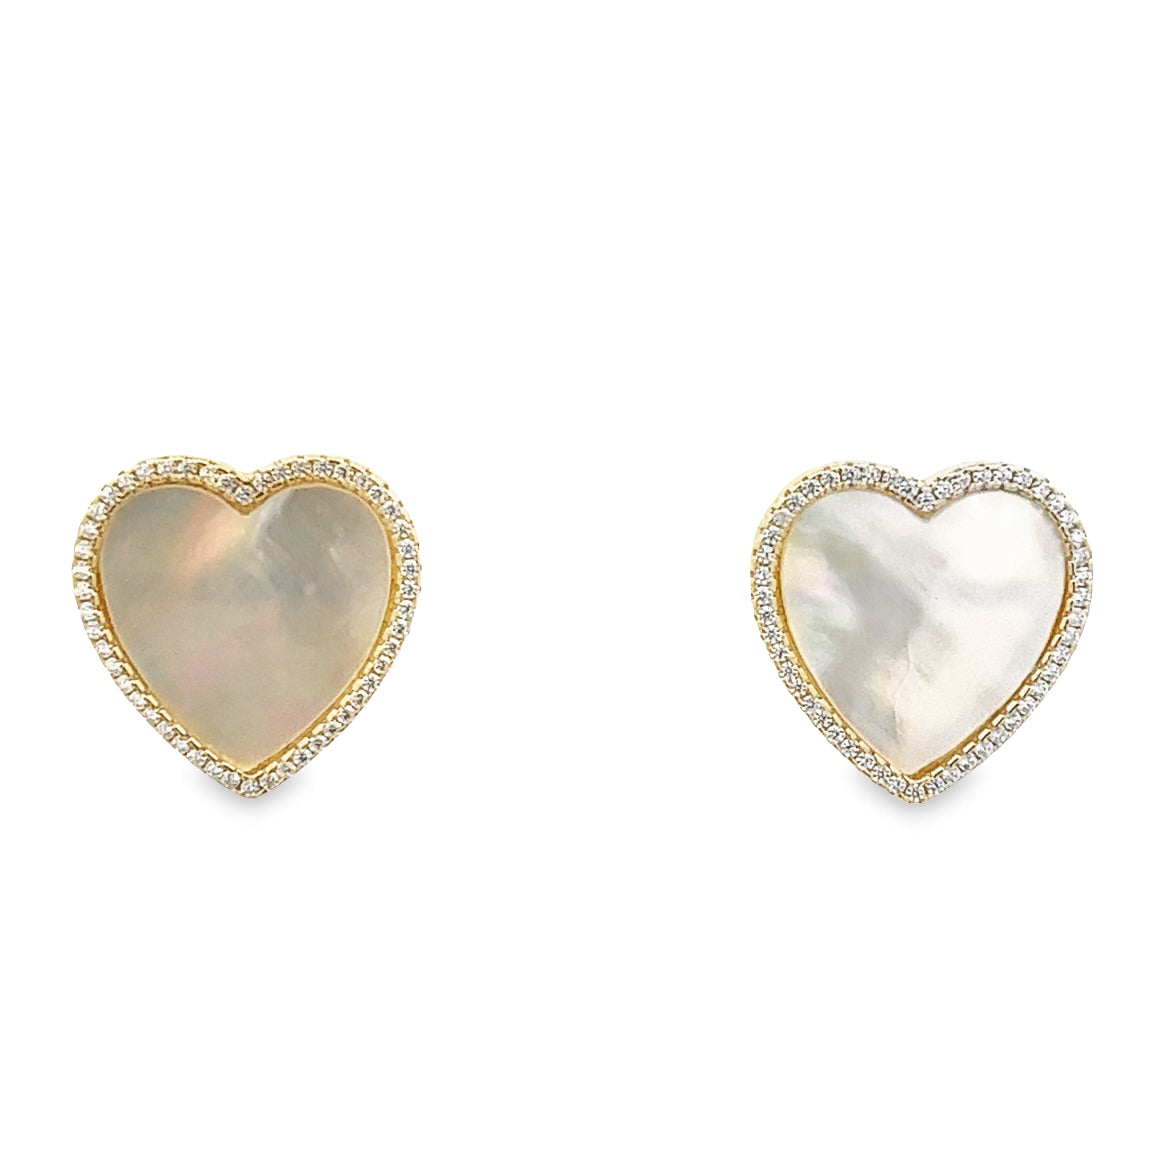 925 SILVER GOLD PLATED HEART EARRINGS WITH MOTHER OF PEARL